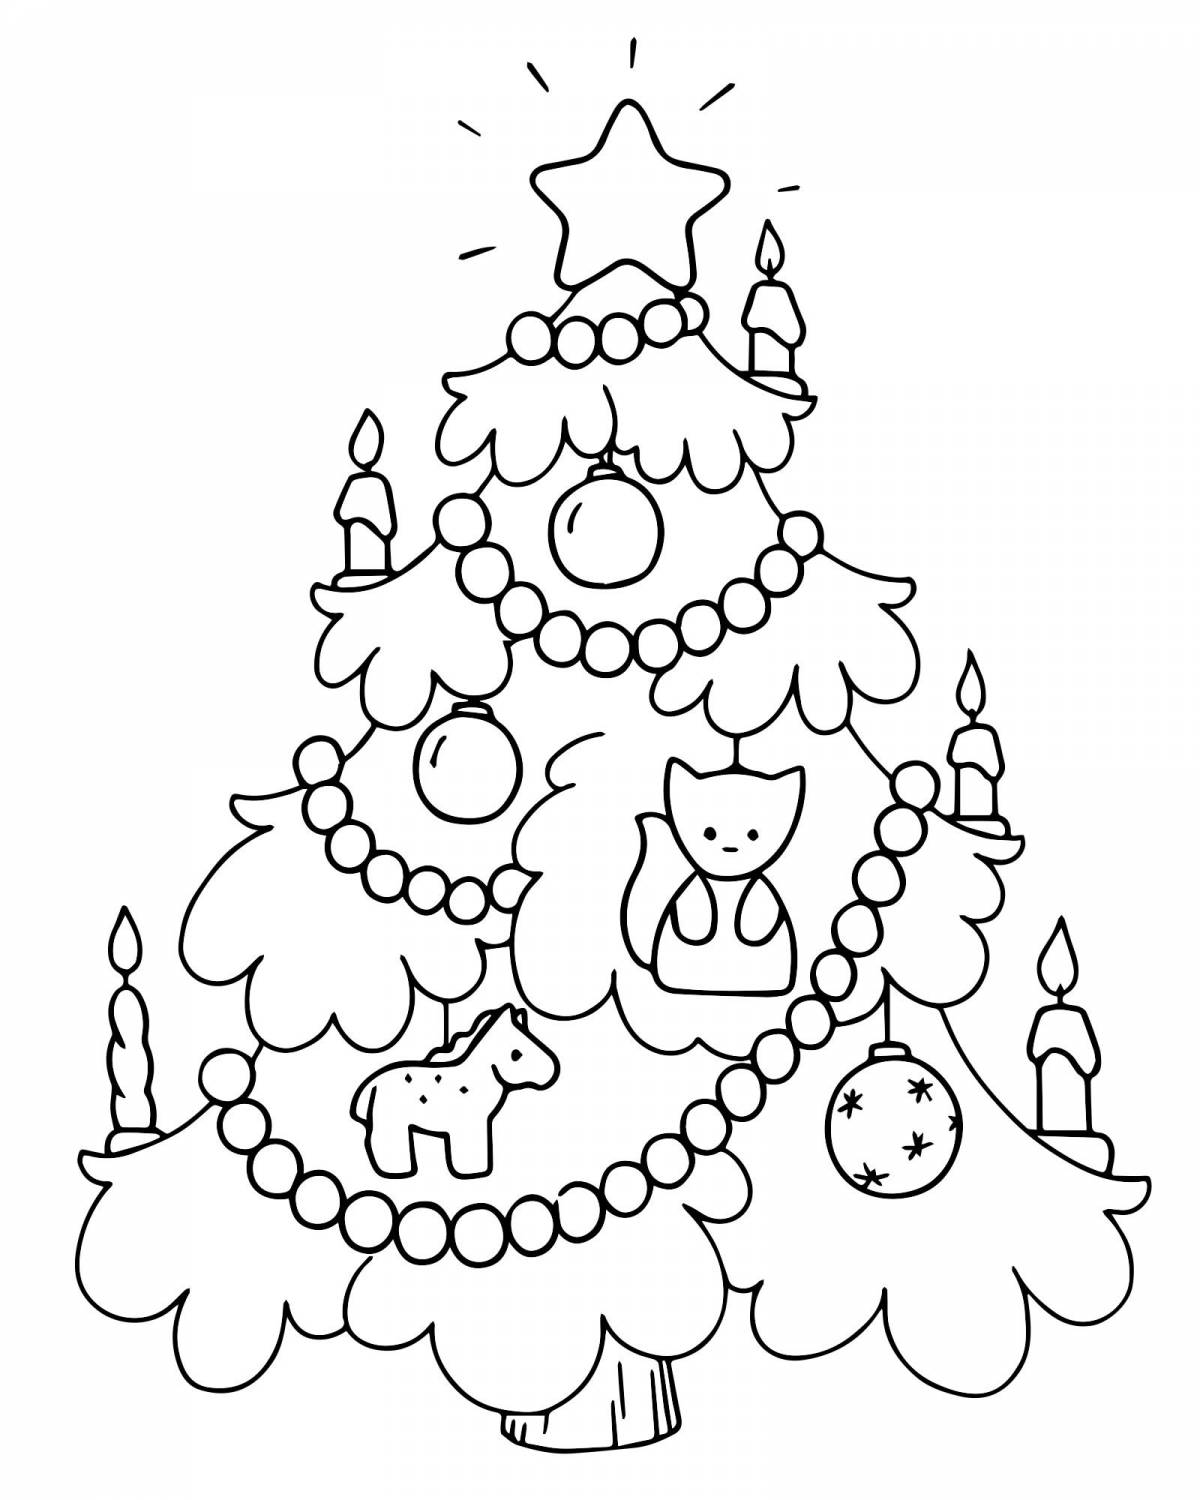 Outstanding christmas tree coloring page for kids